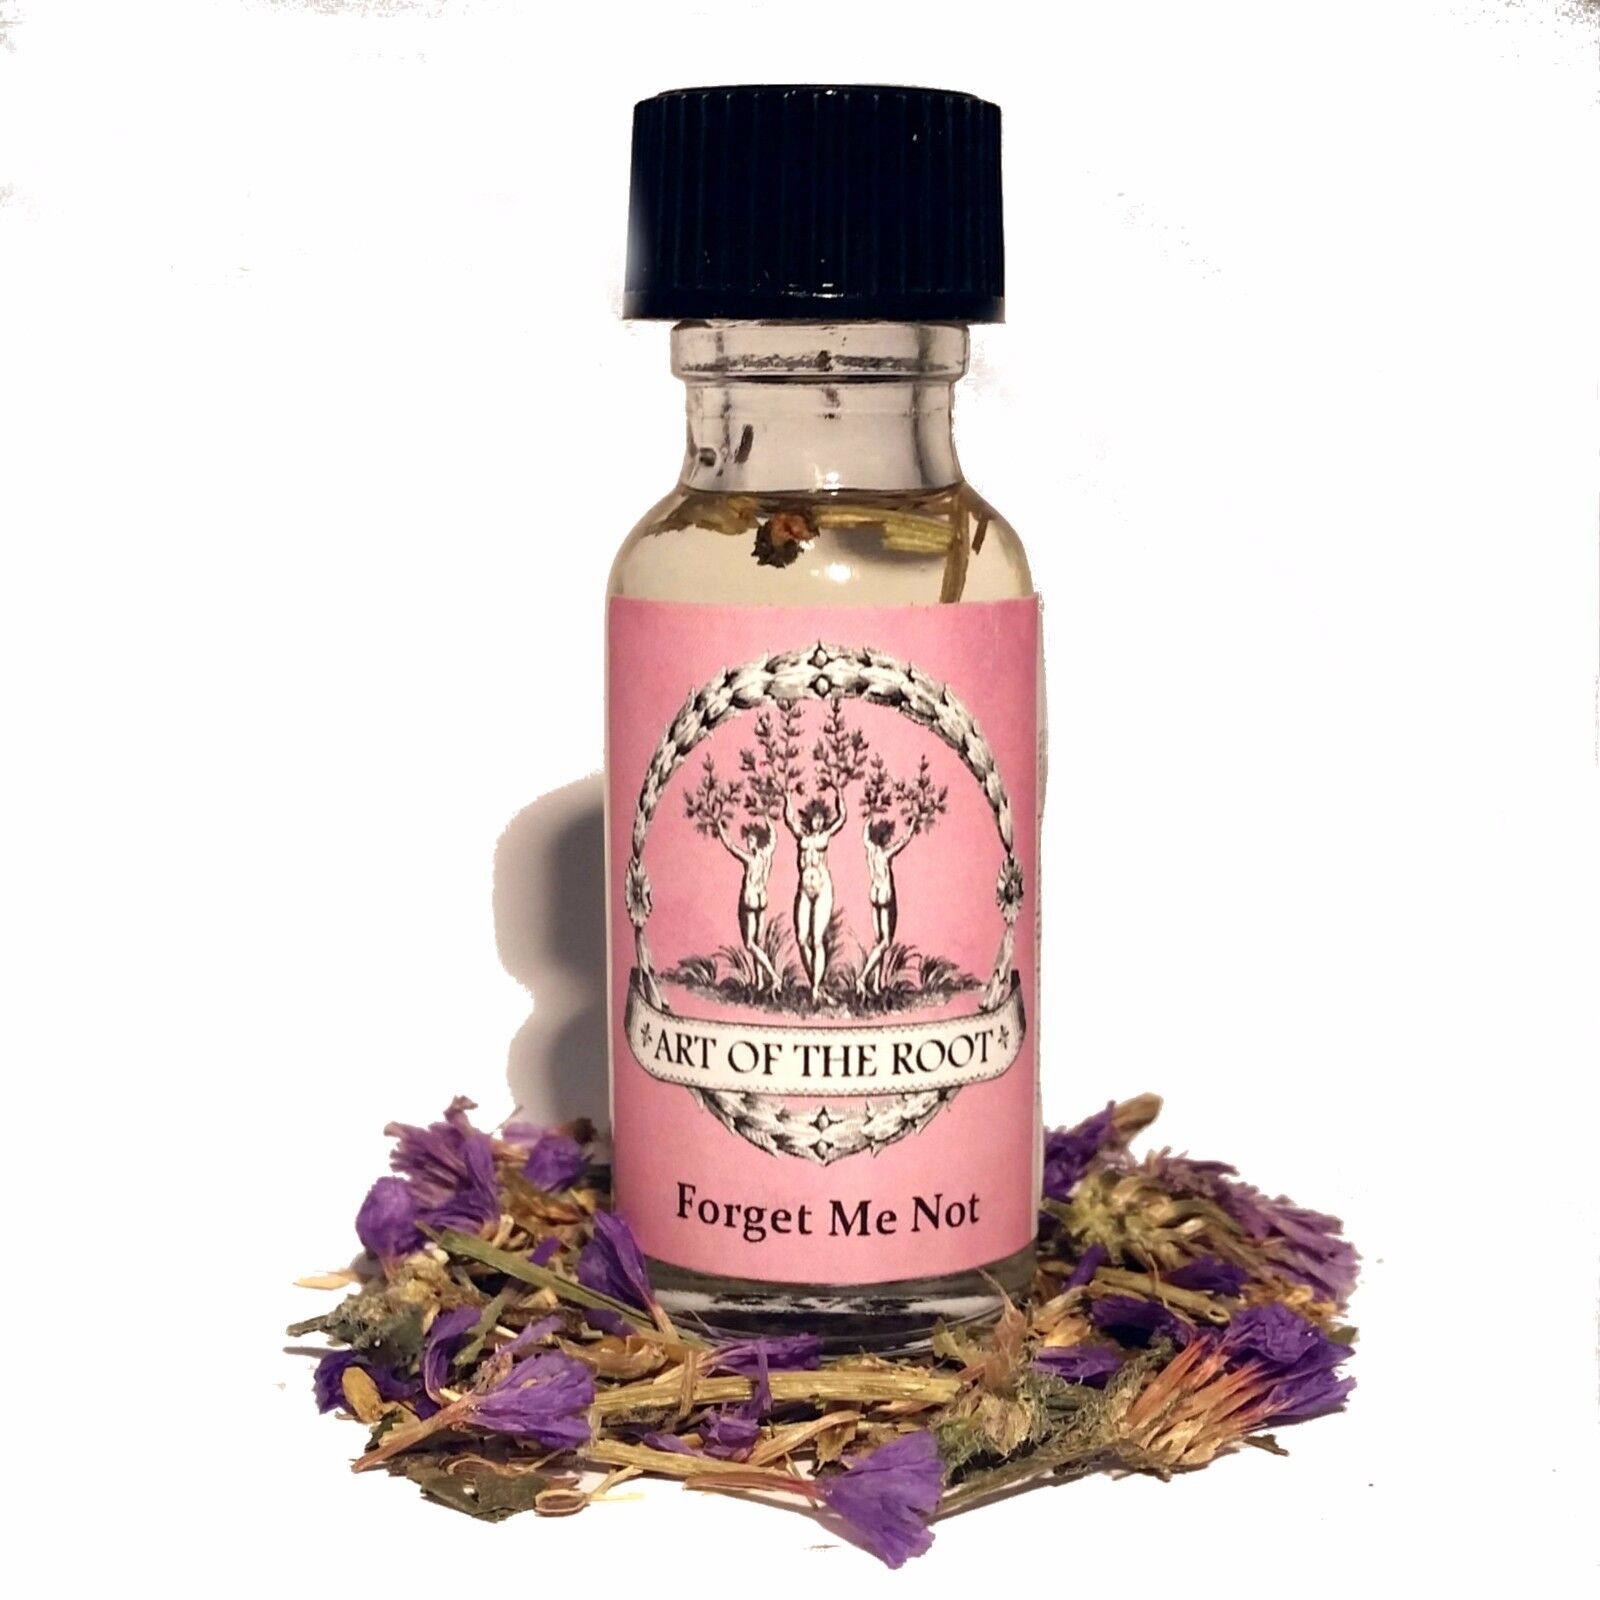 Forget Me Not Oil for Commitment, Relationships, Love Hoodoo Voodoo Wiccan Pagan